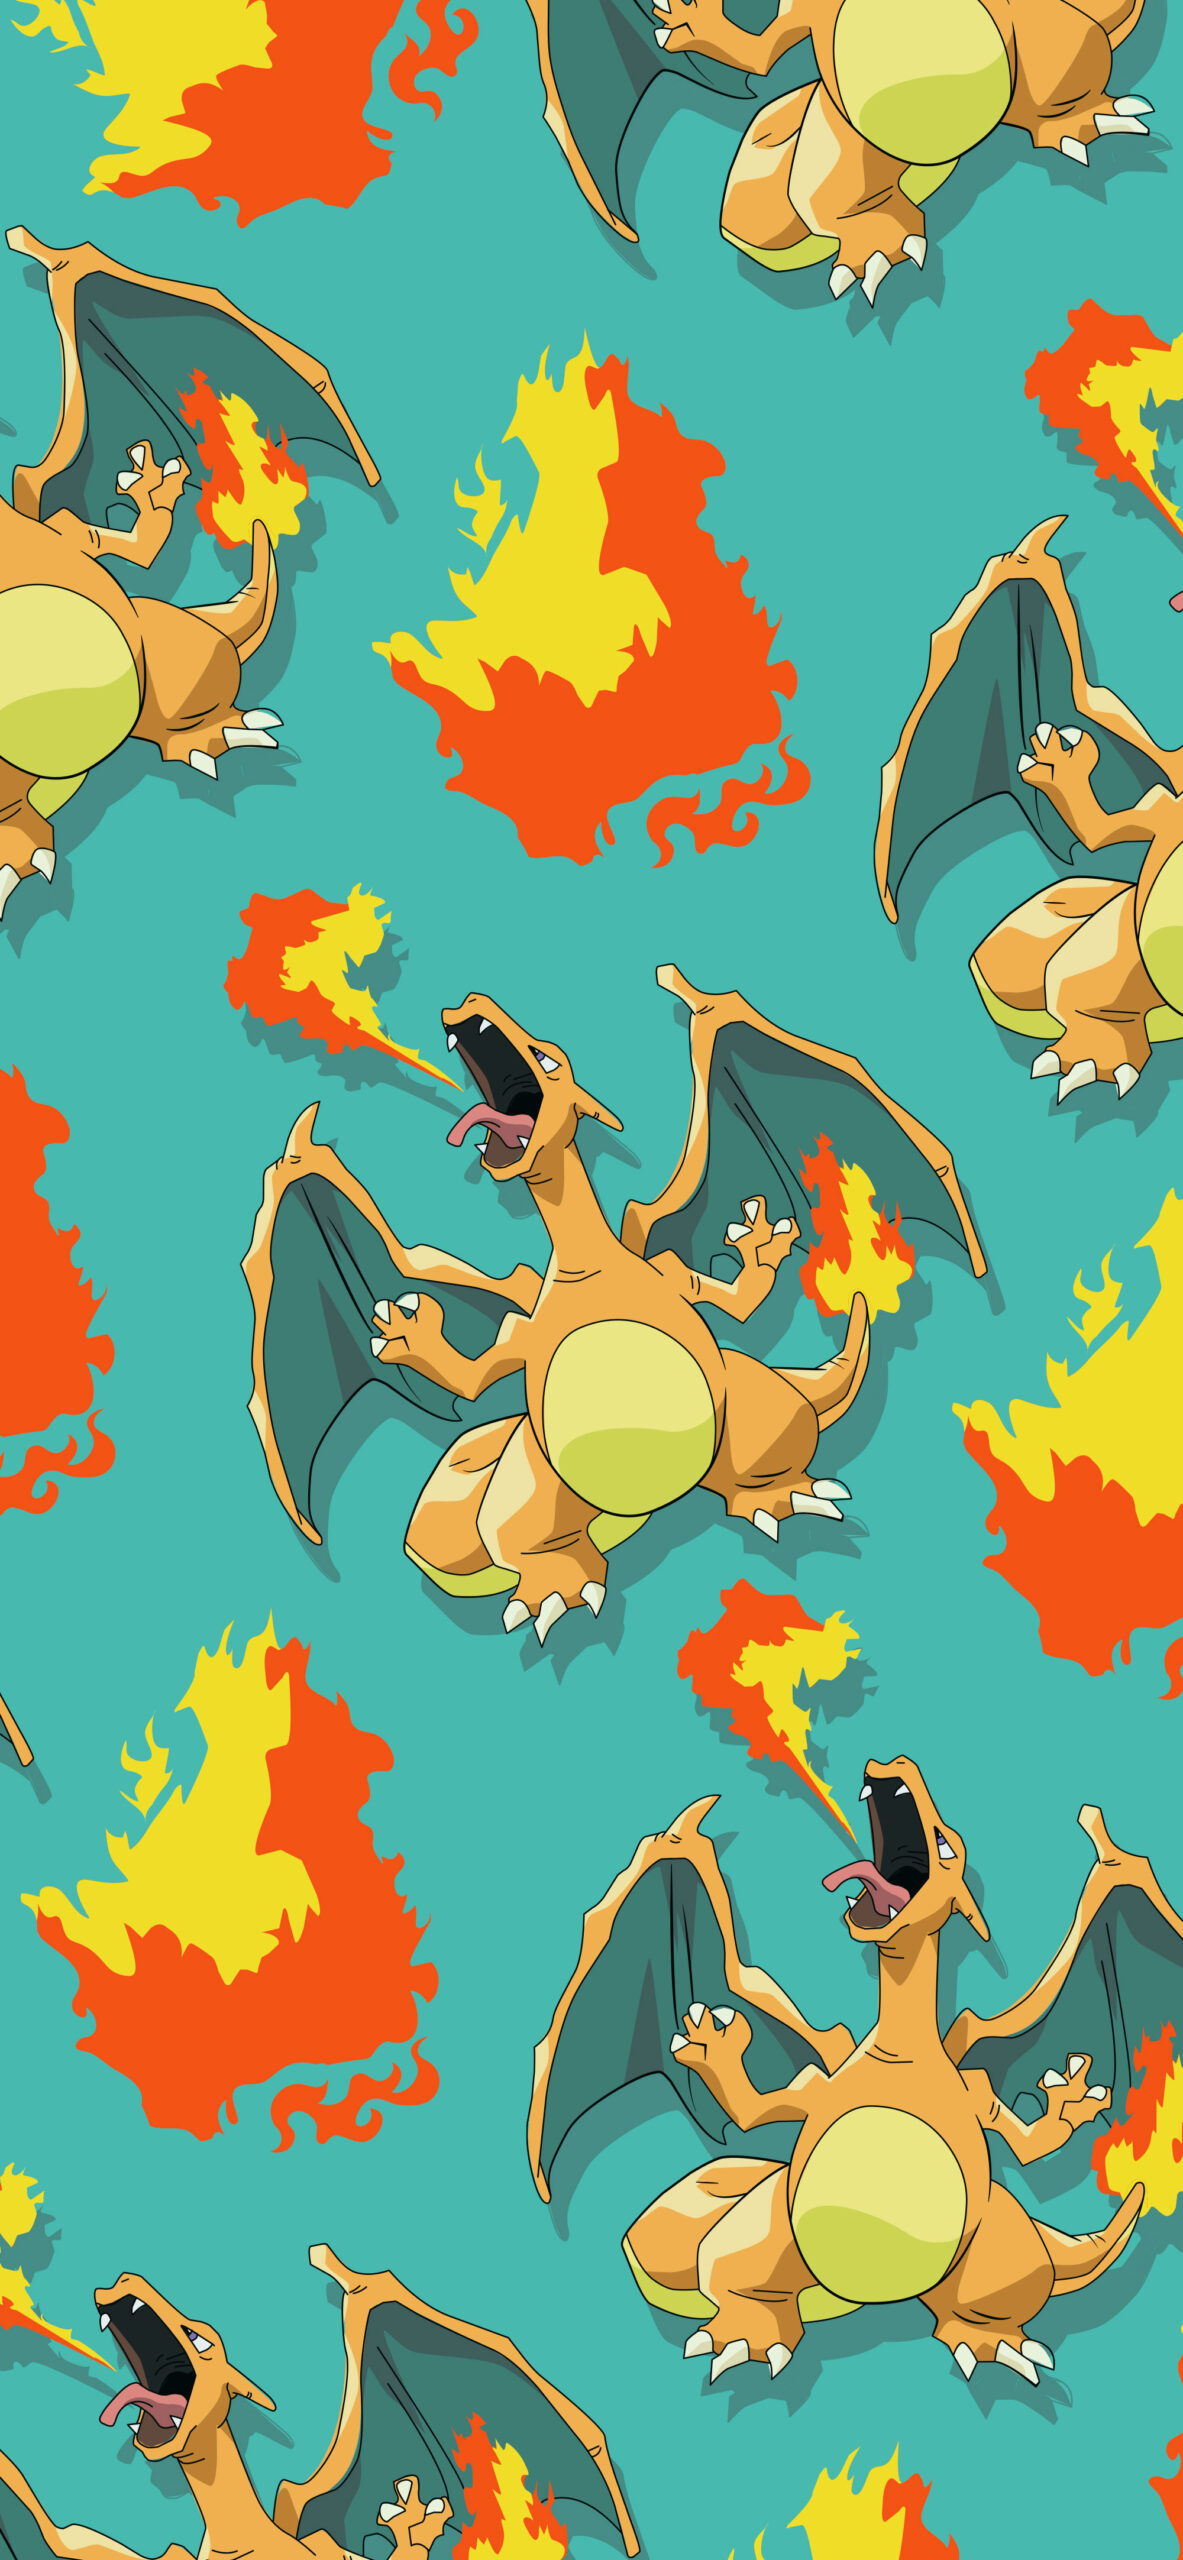 Pokemon wallpaper hd for iphone with charizard